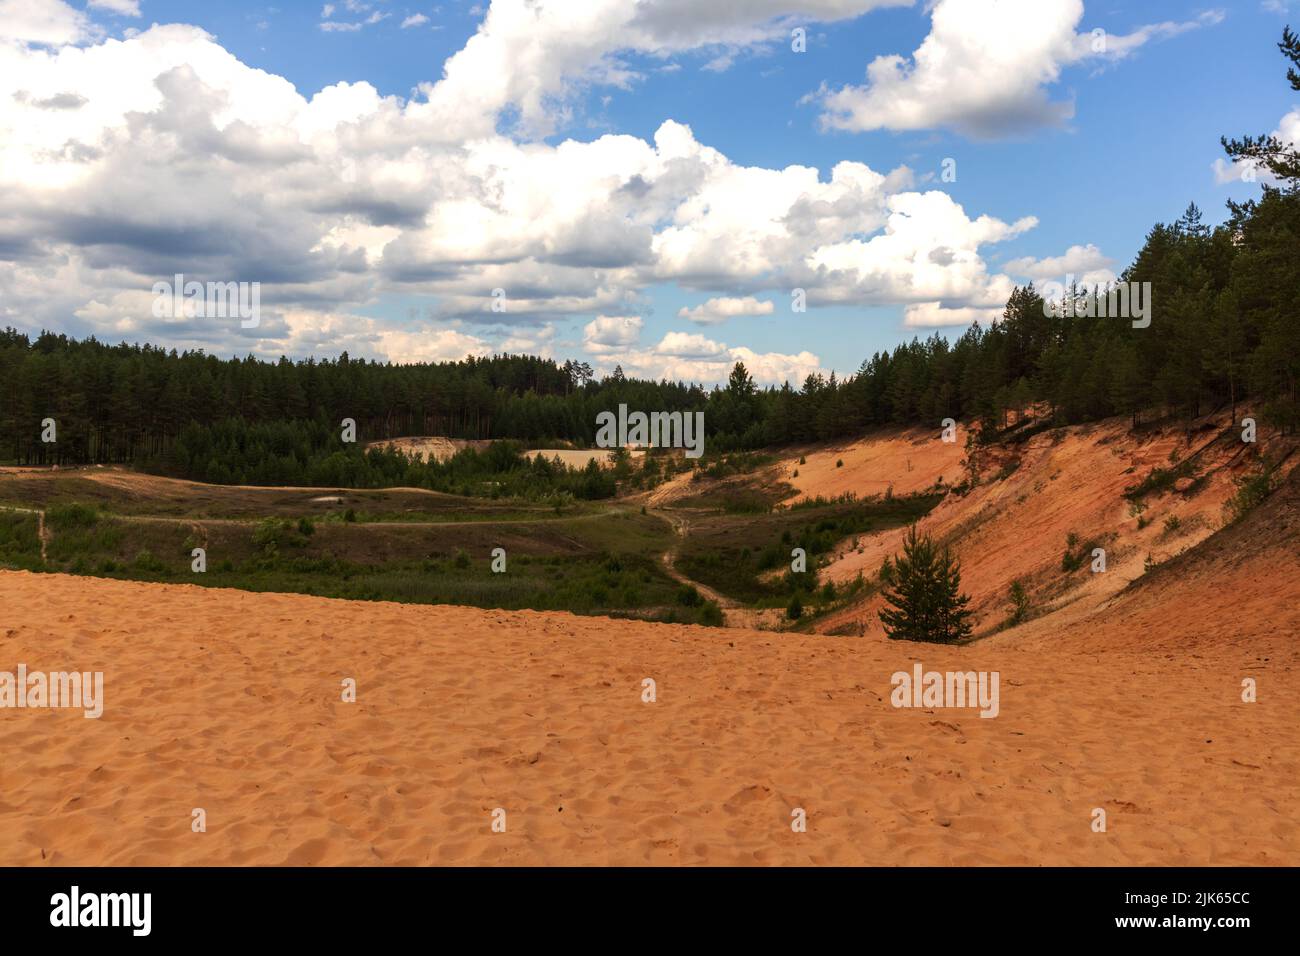 yellow sand dune with green pine and fir trees and blue sky with clouds Stock Photo